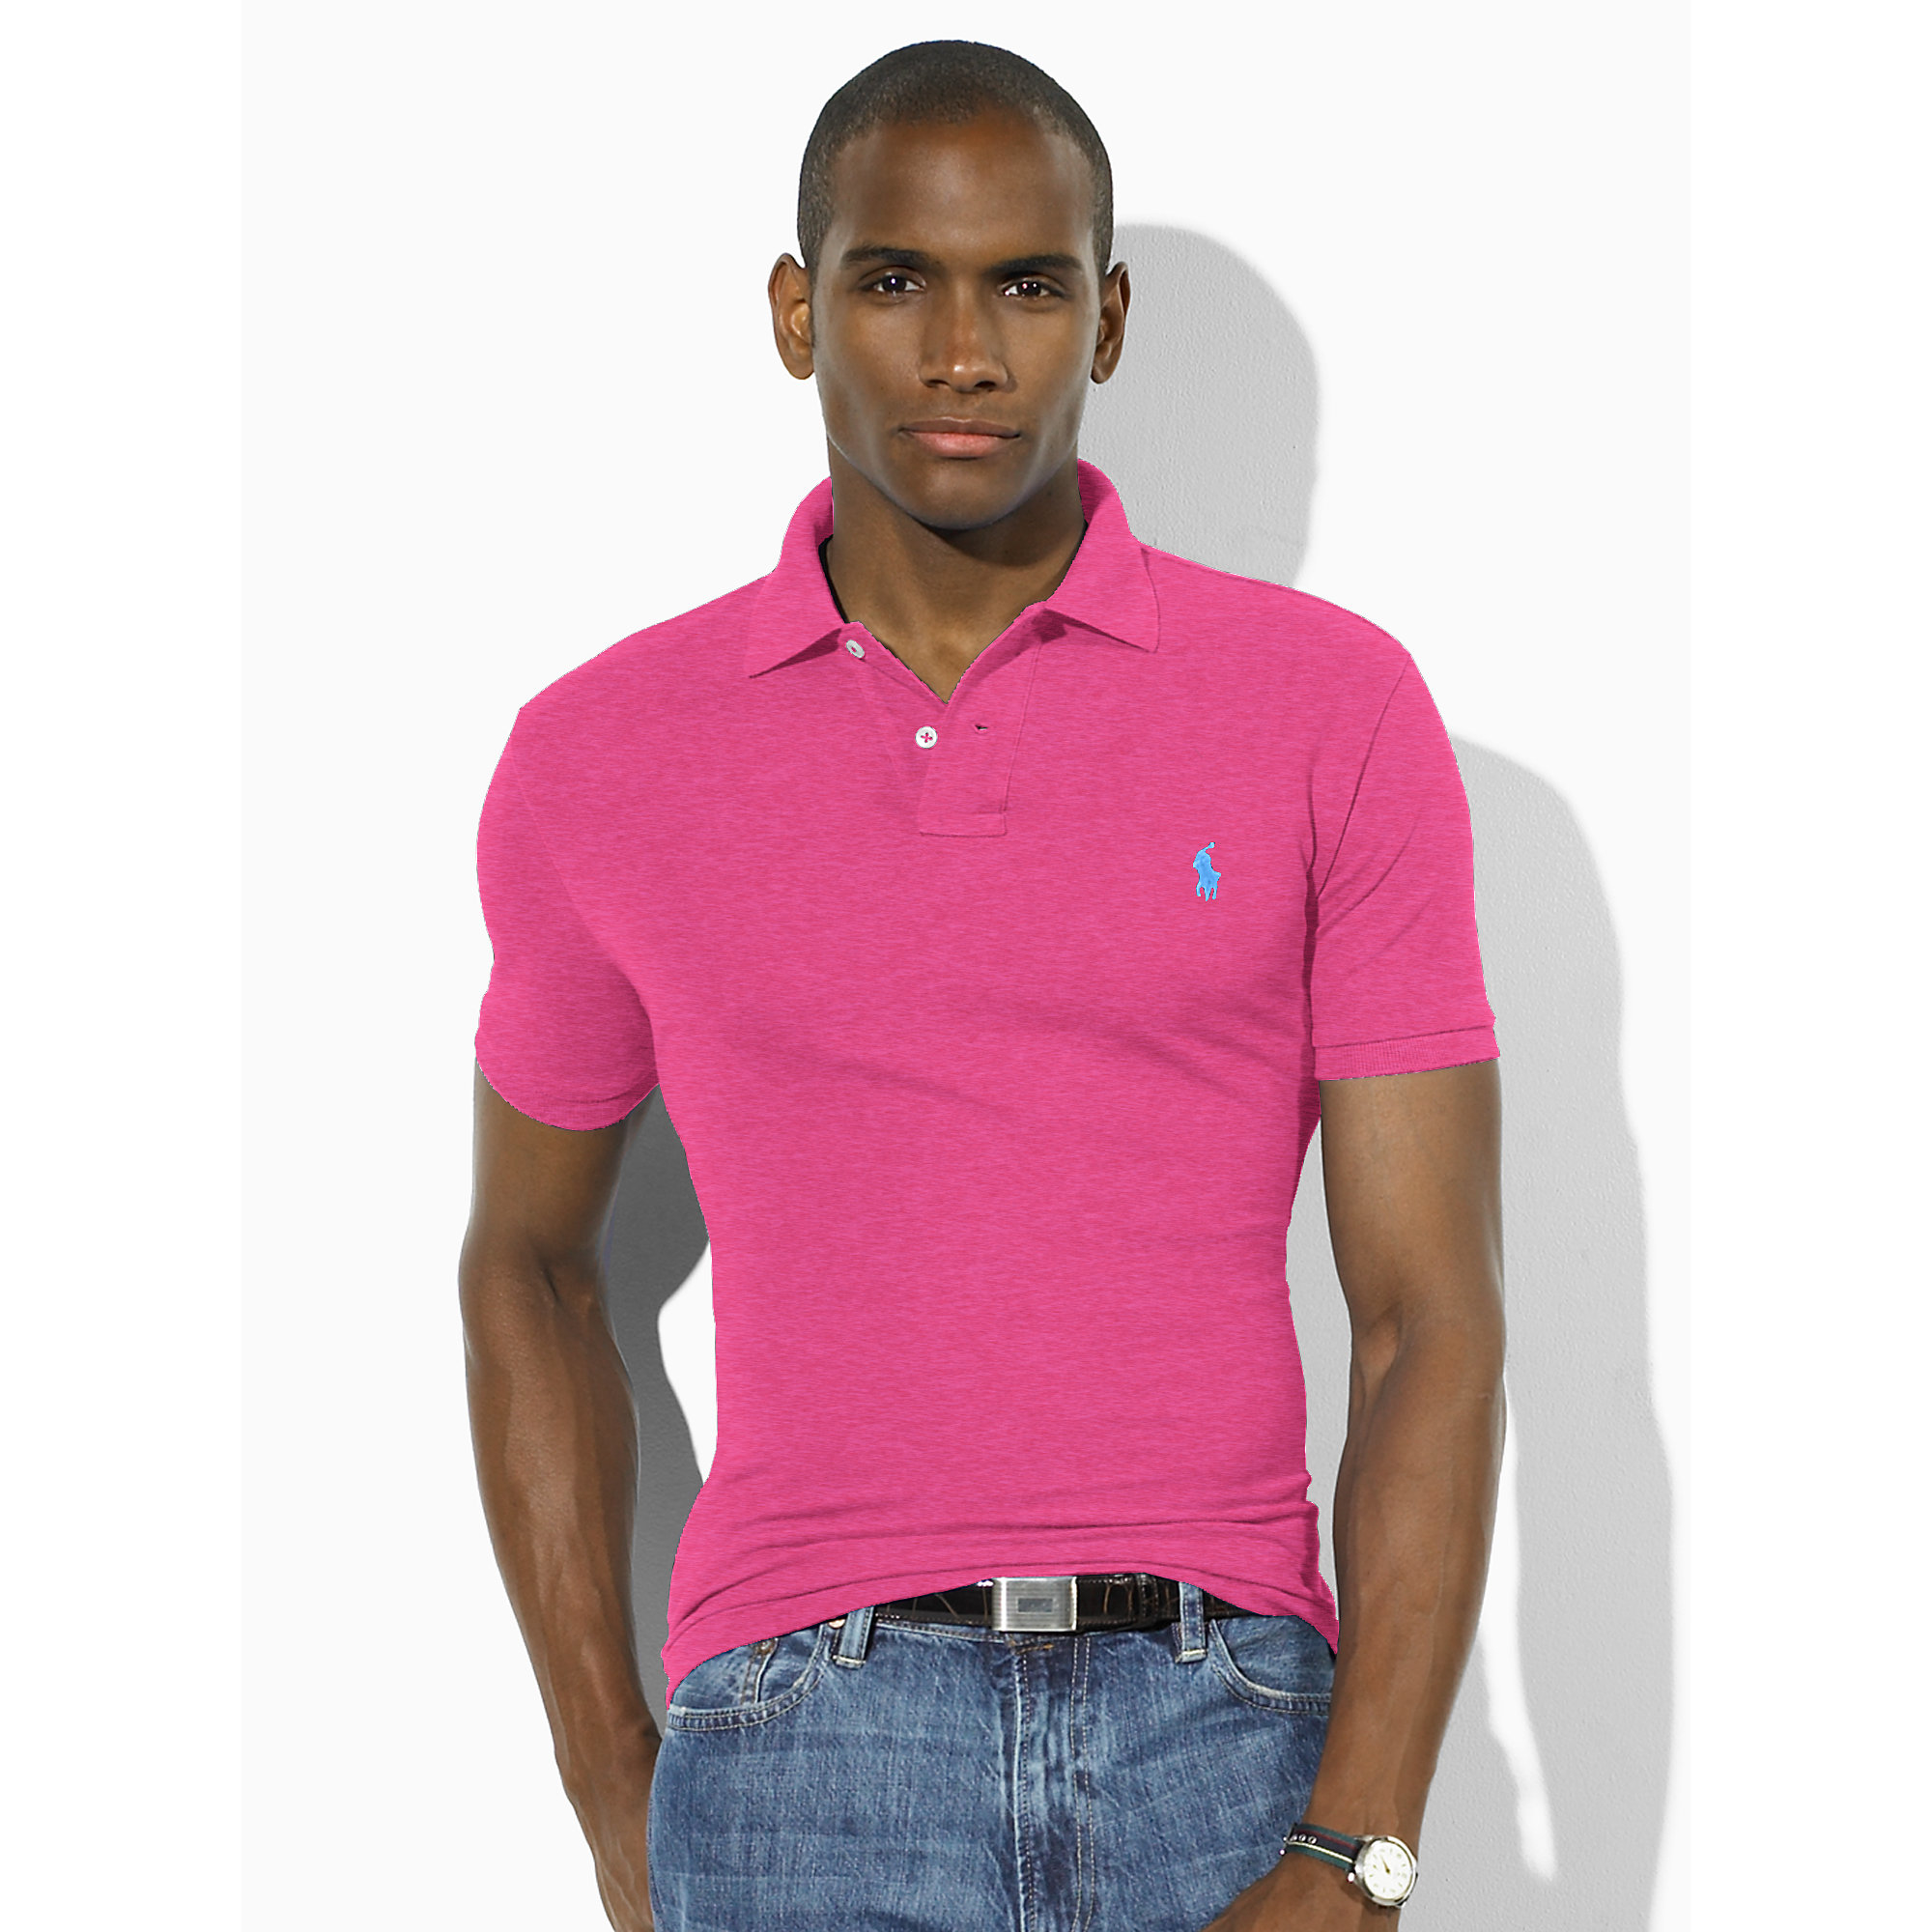 Polo Ralph Lauren Slim-fit Mesh Polo Shirt in Pink for Men - Lyst